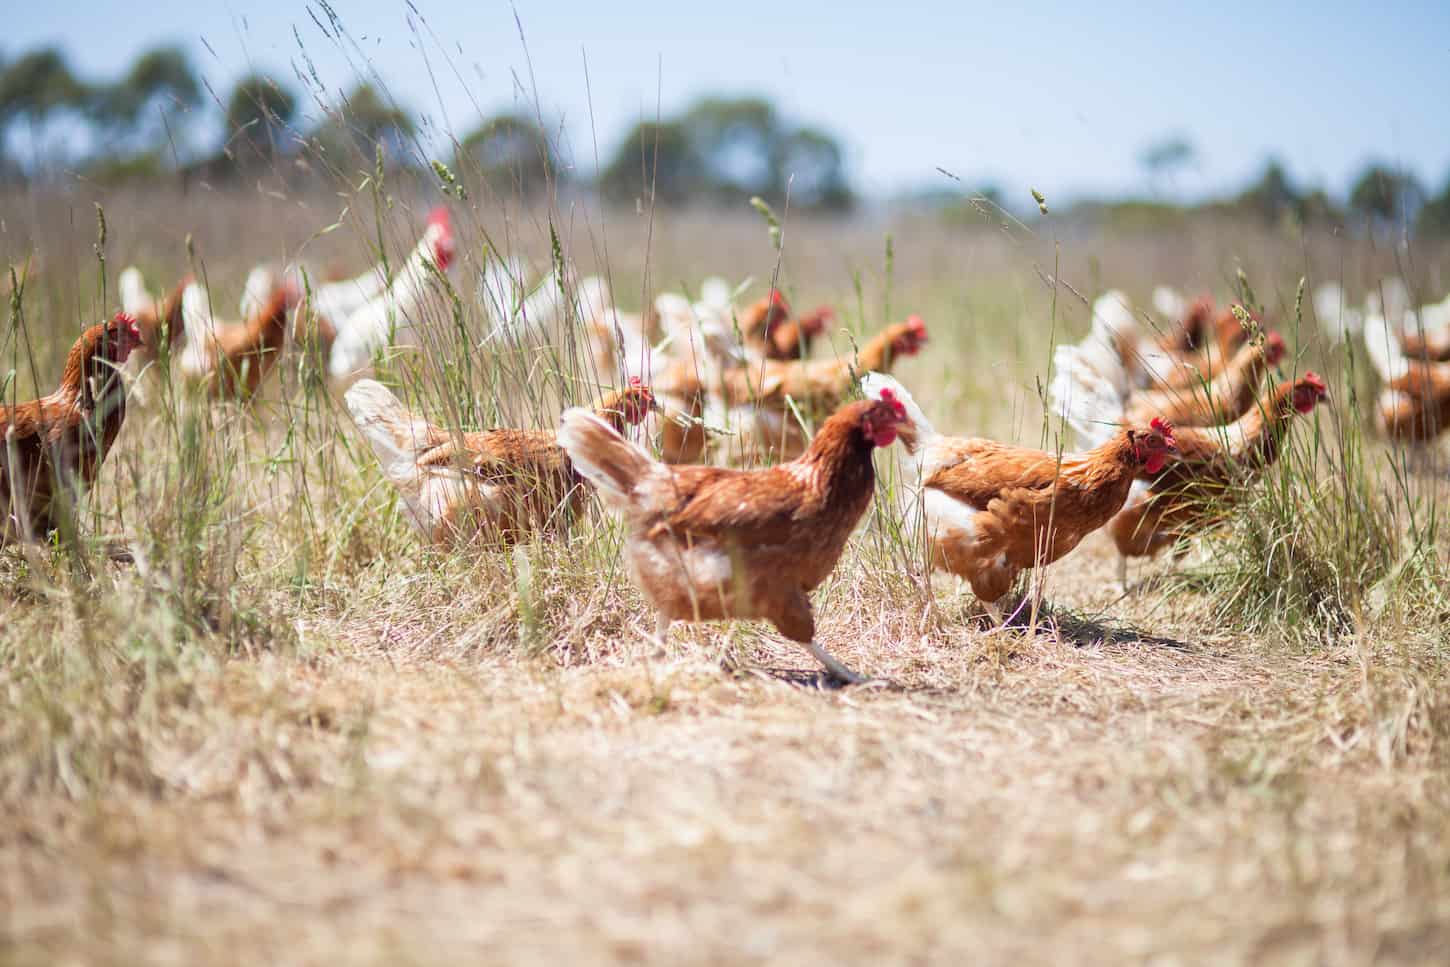 An image of free-range chickens in a farmyard.